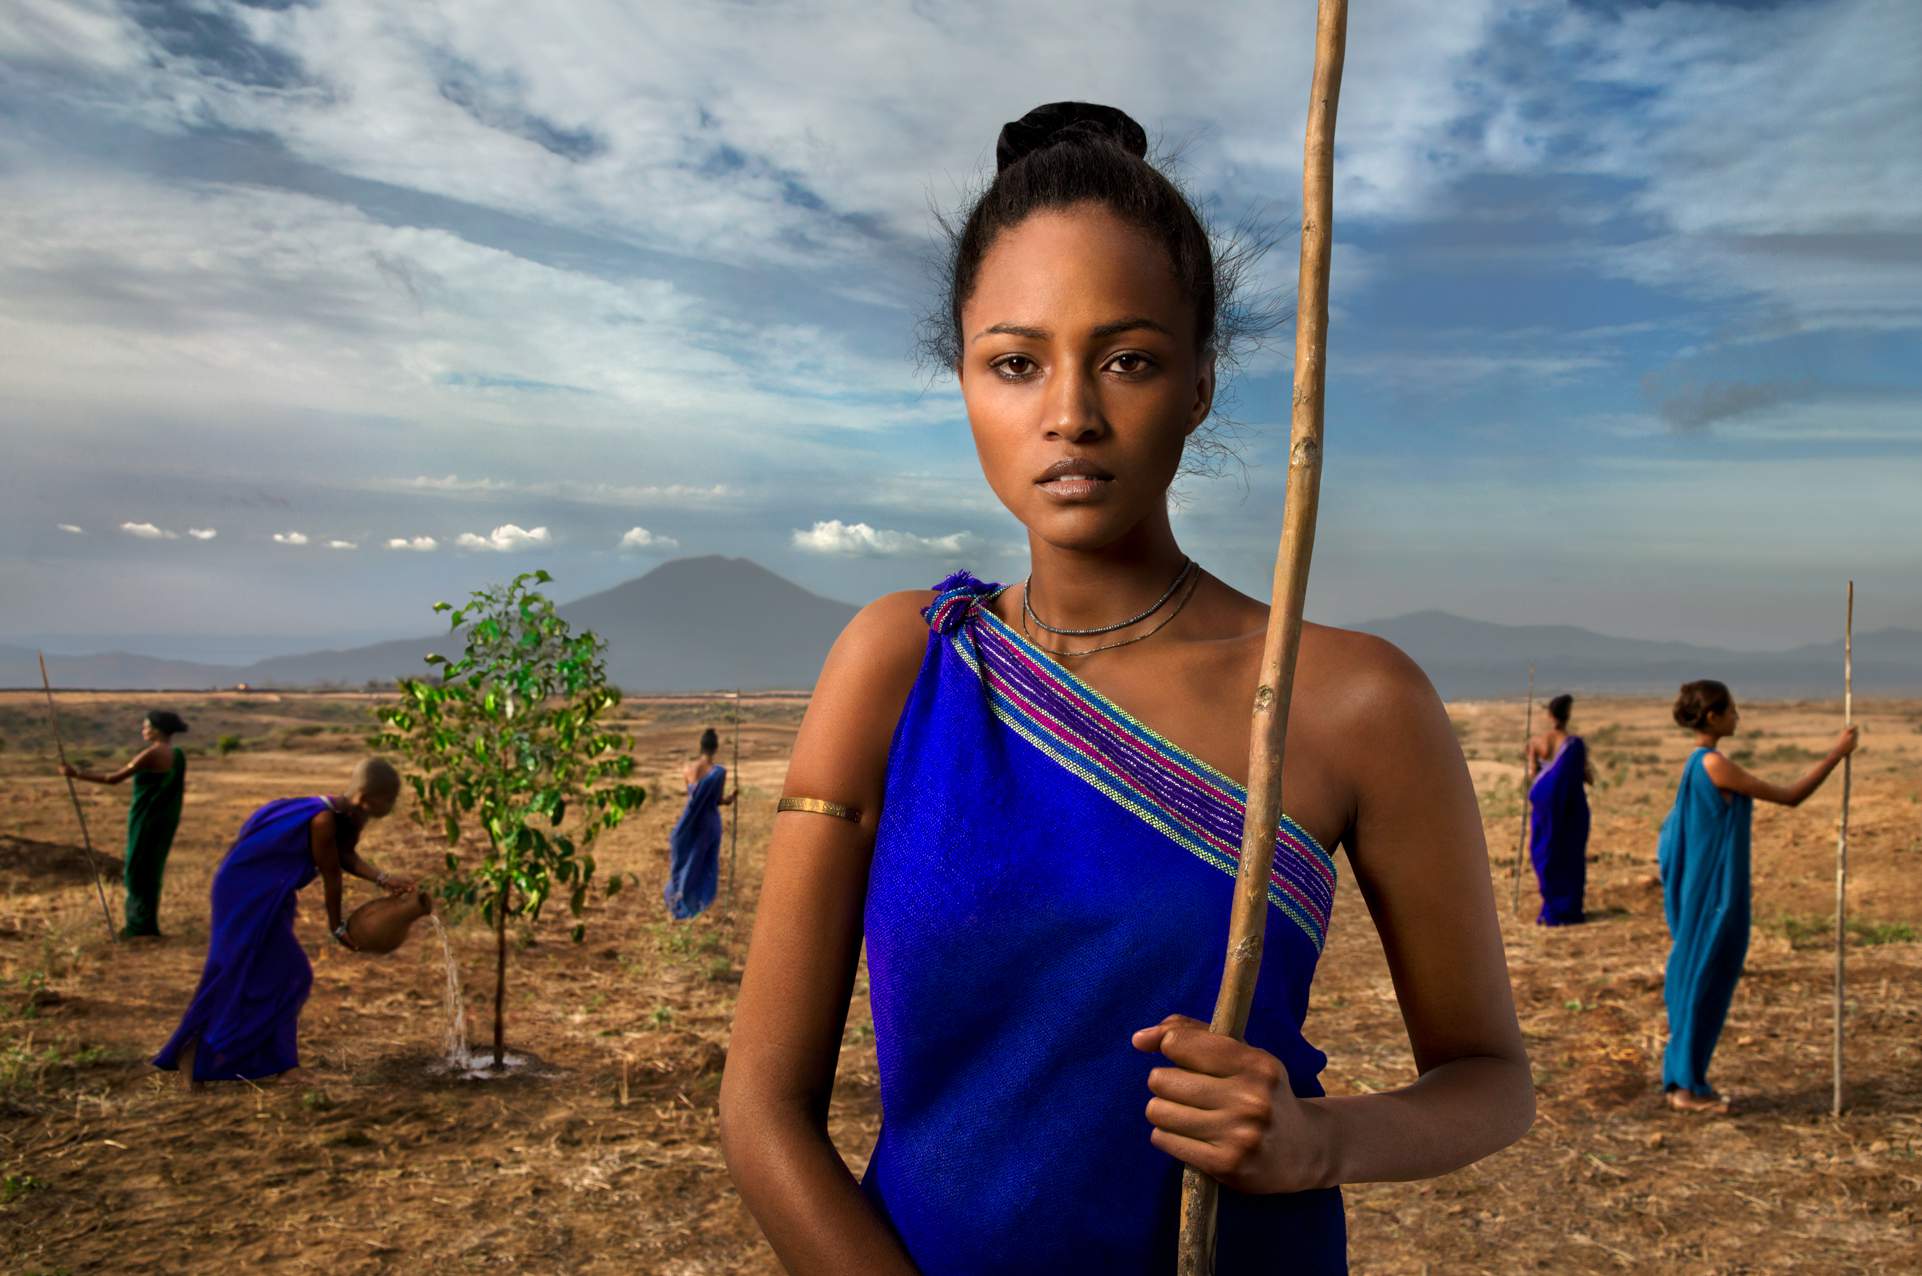 Our-Roots-Photograph-by-Steve-McCurry-The-Earth-Defenders-2015-Lavazza-Calendar.jpg